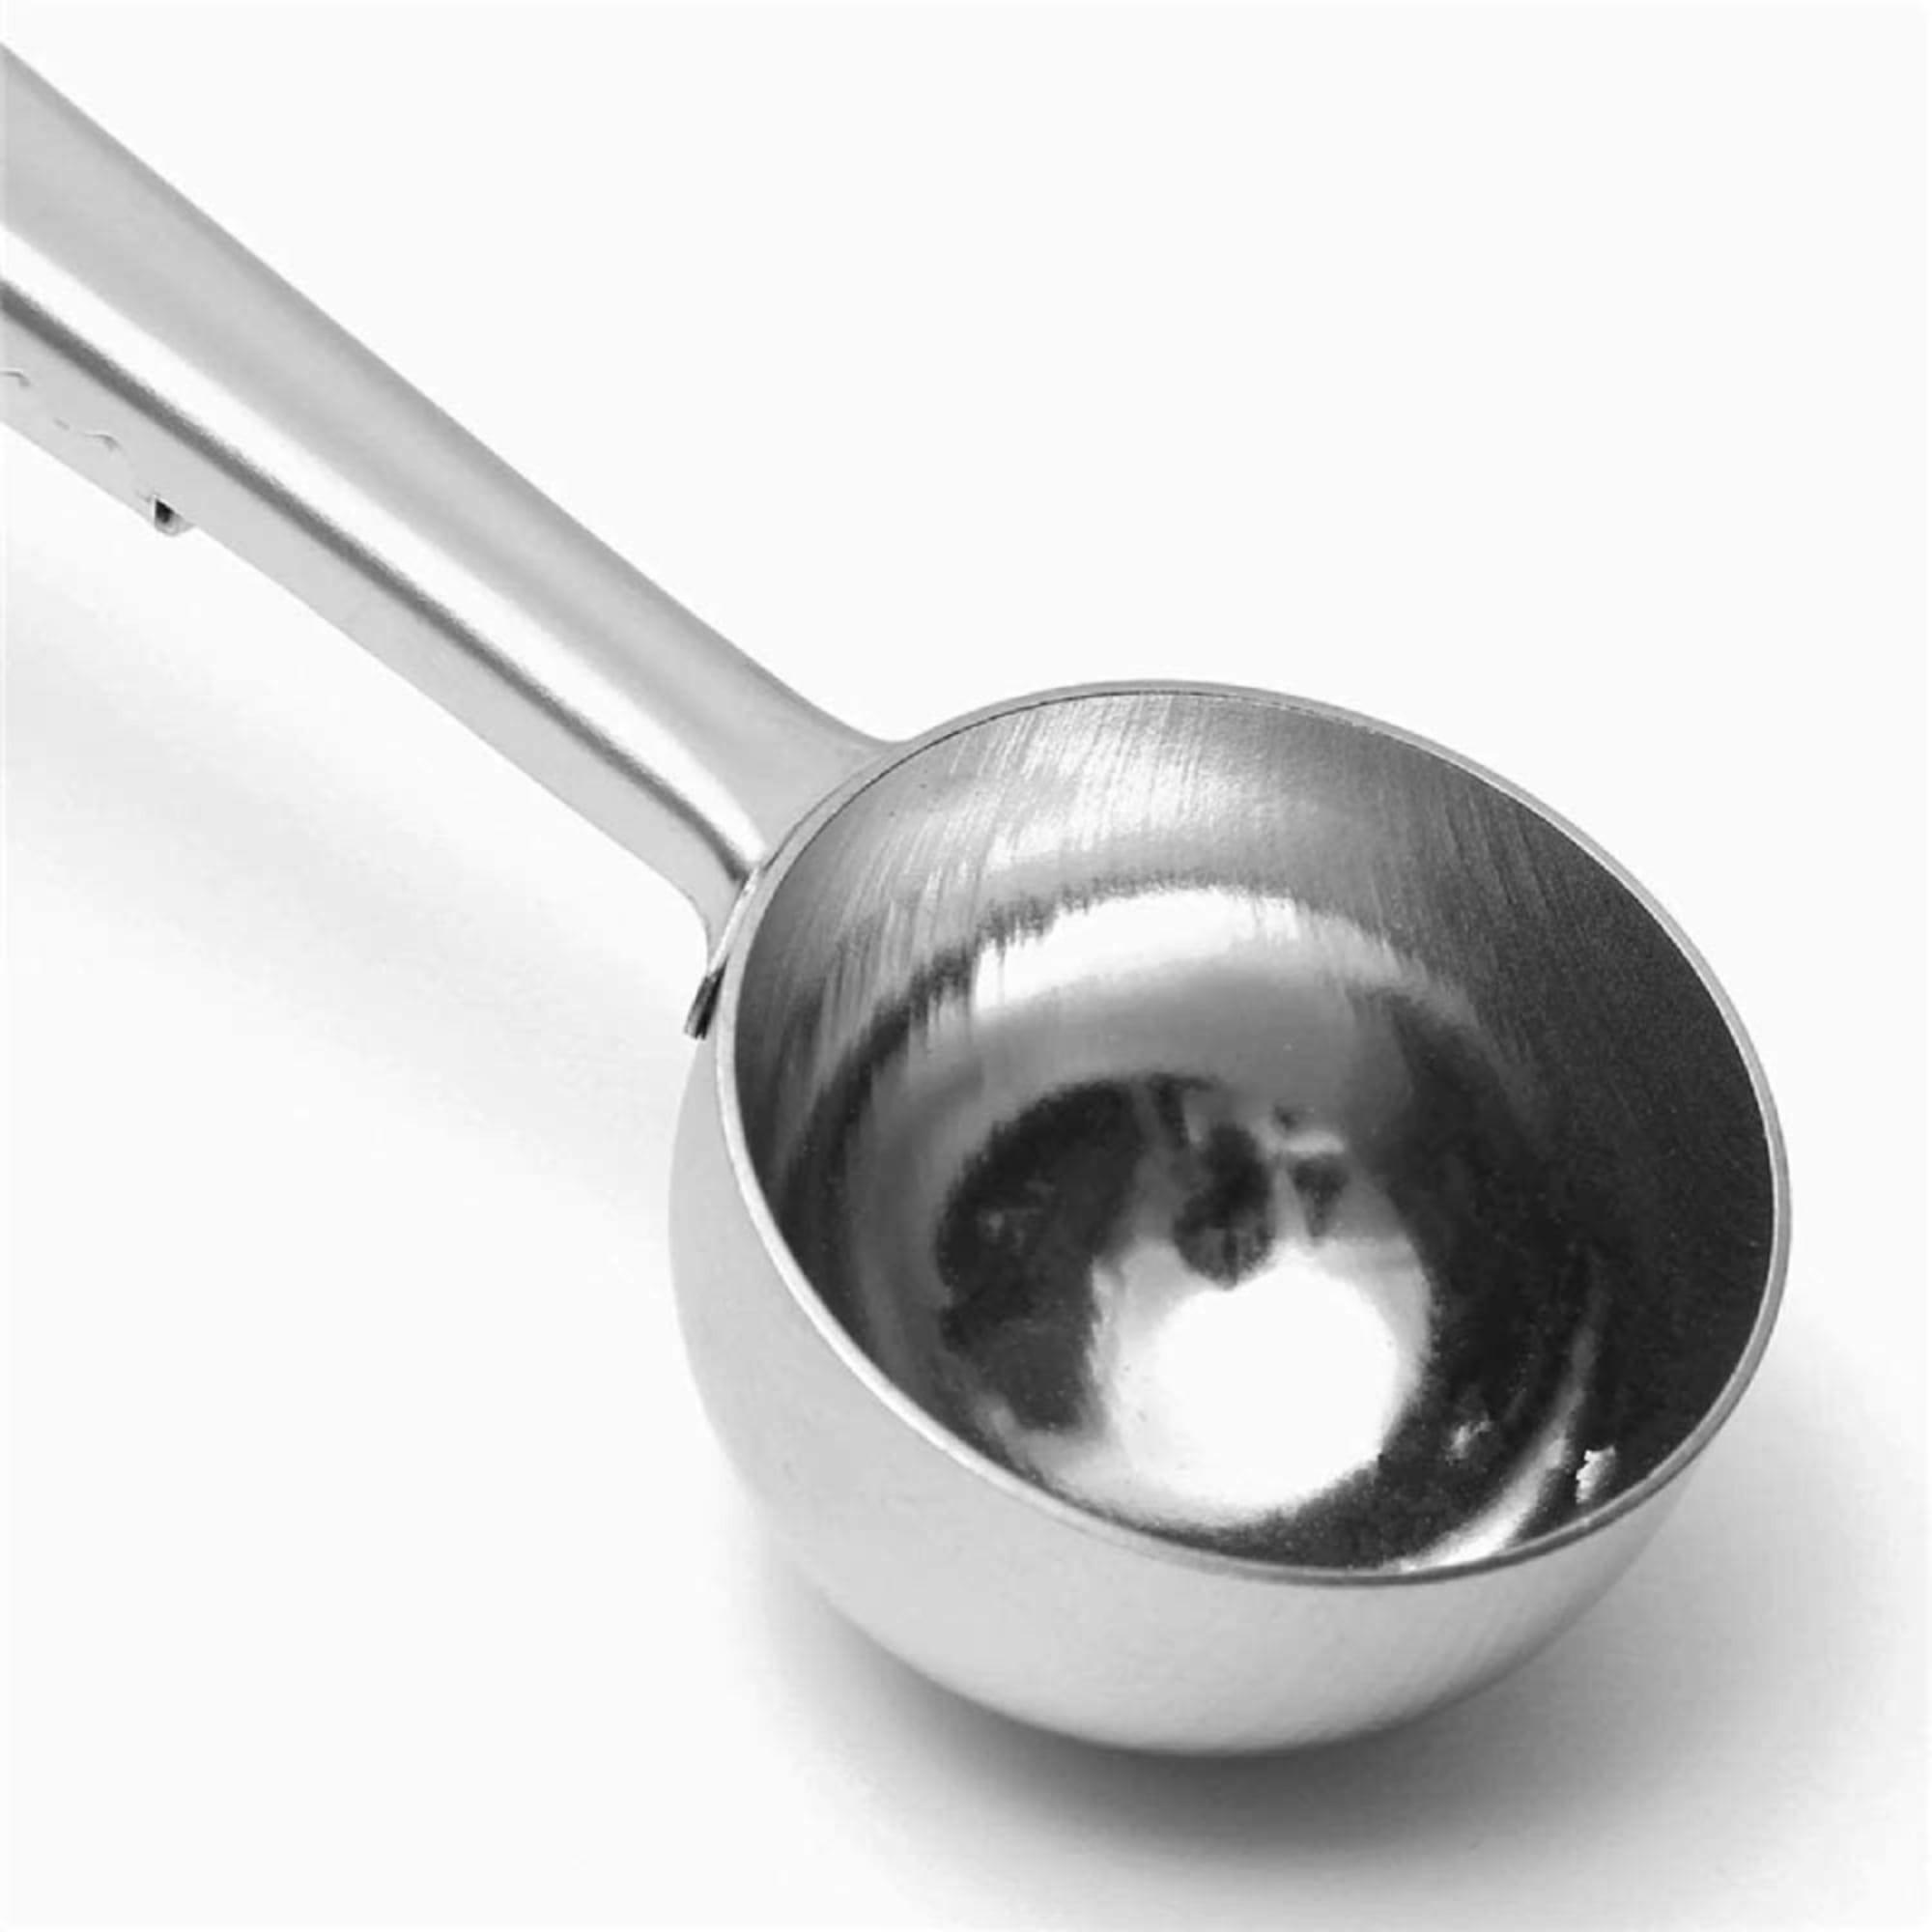 La Cafetiere Stainless Steel Coffee Measuring Spoon with Clip Image 4